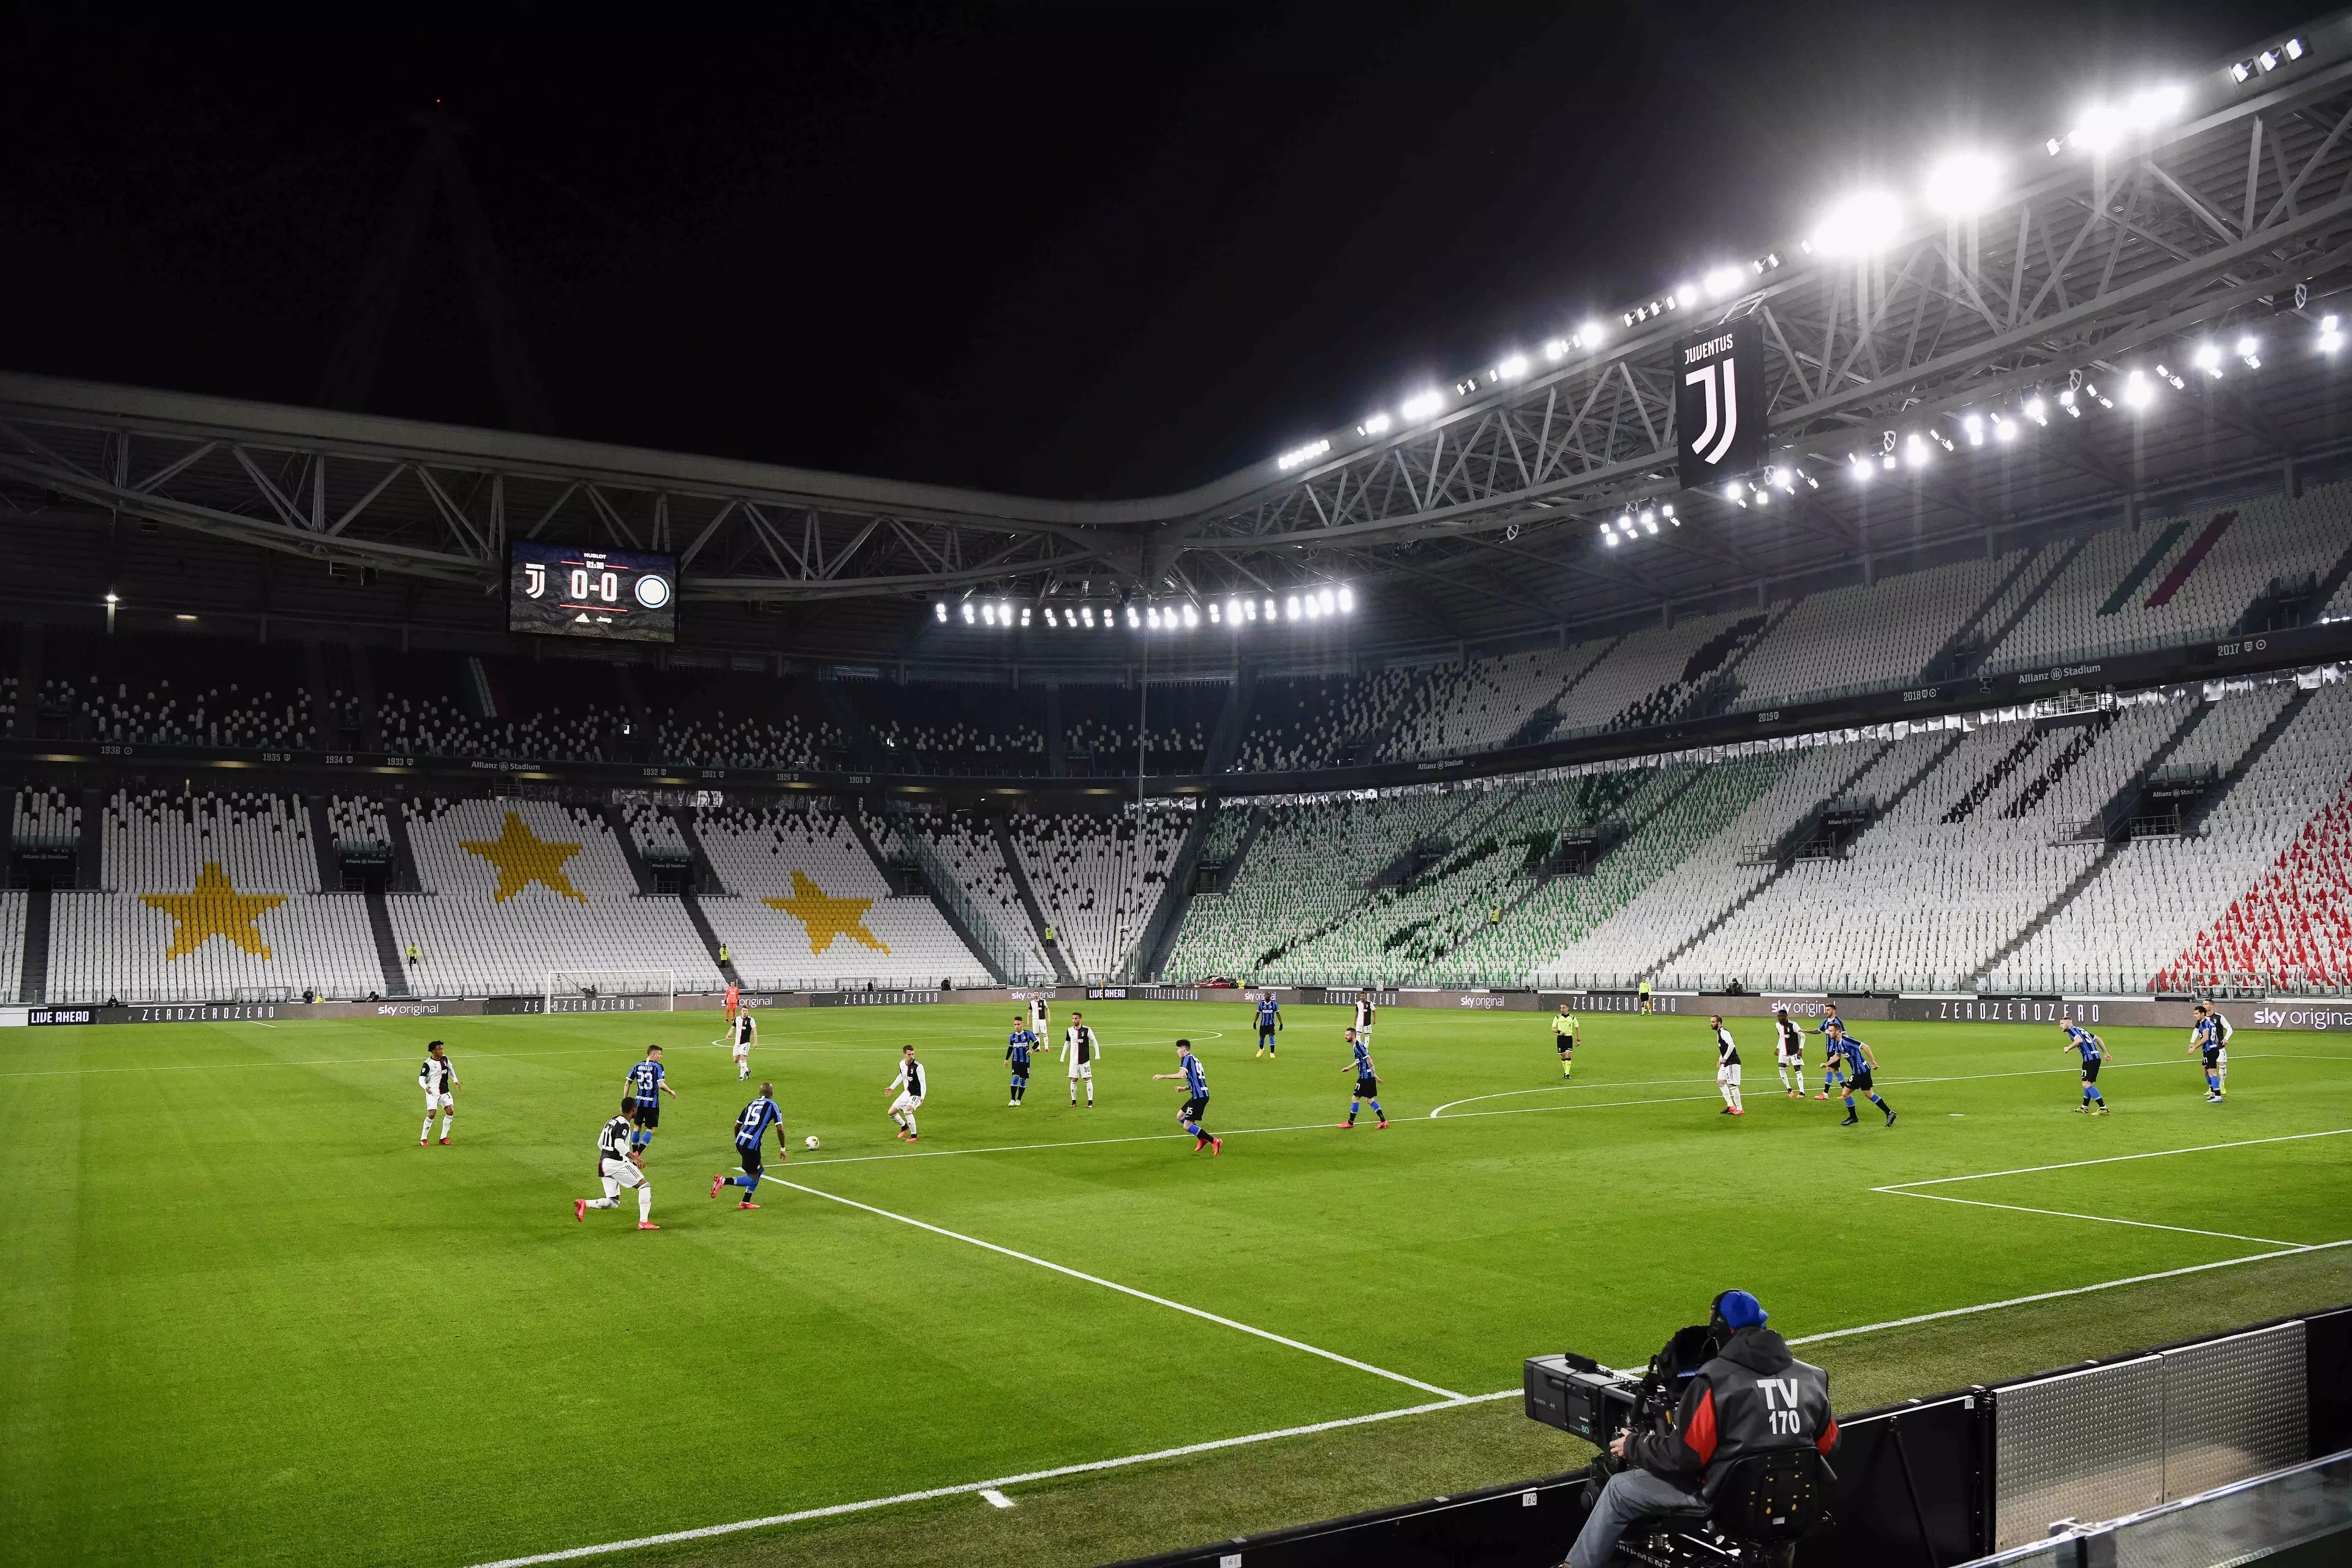 No games in England were played behind closed doors but they were in Italy. Image: PA Images